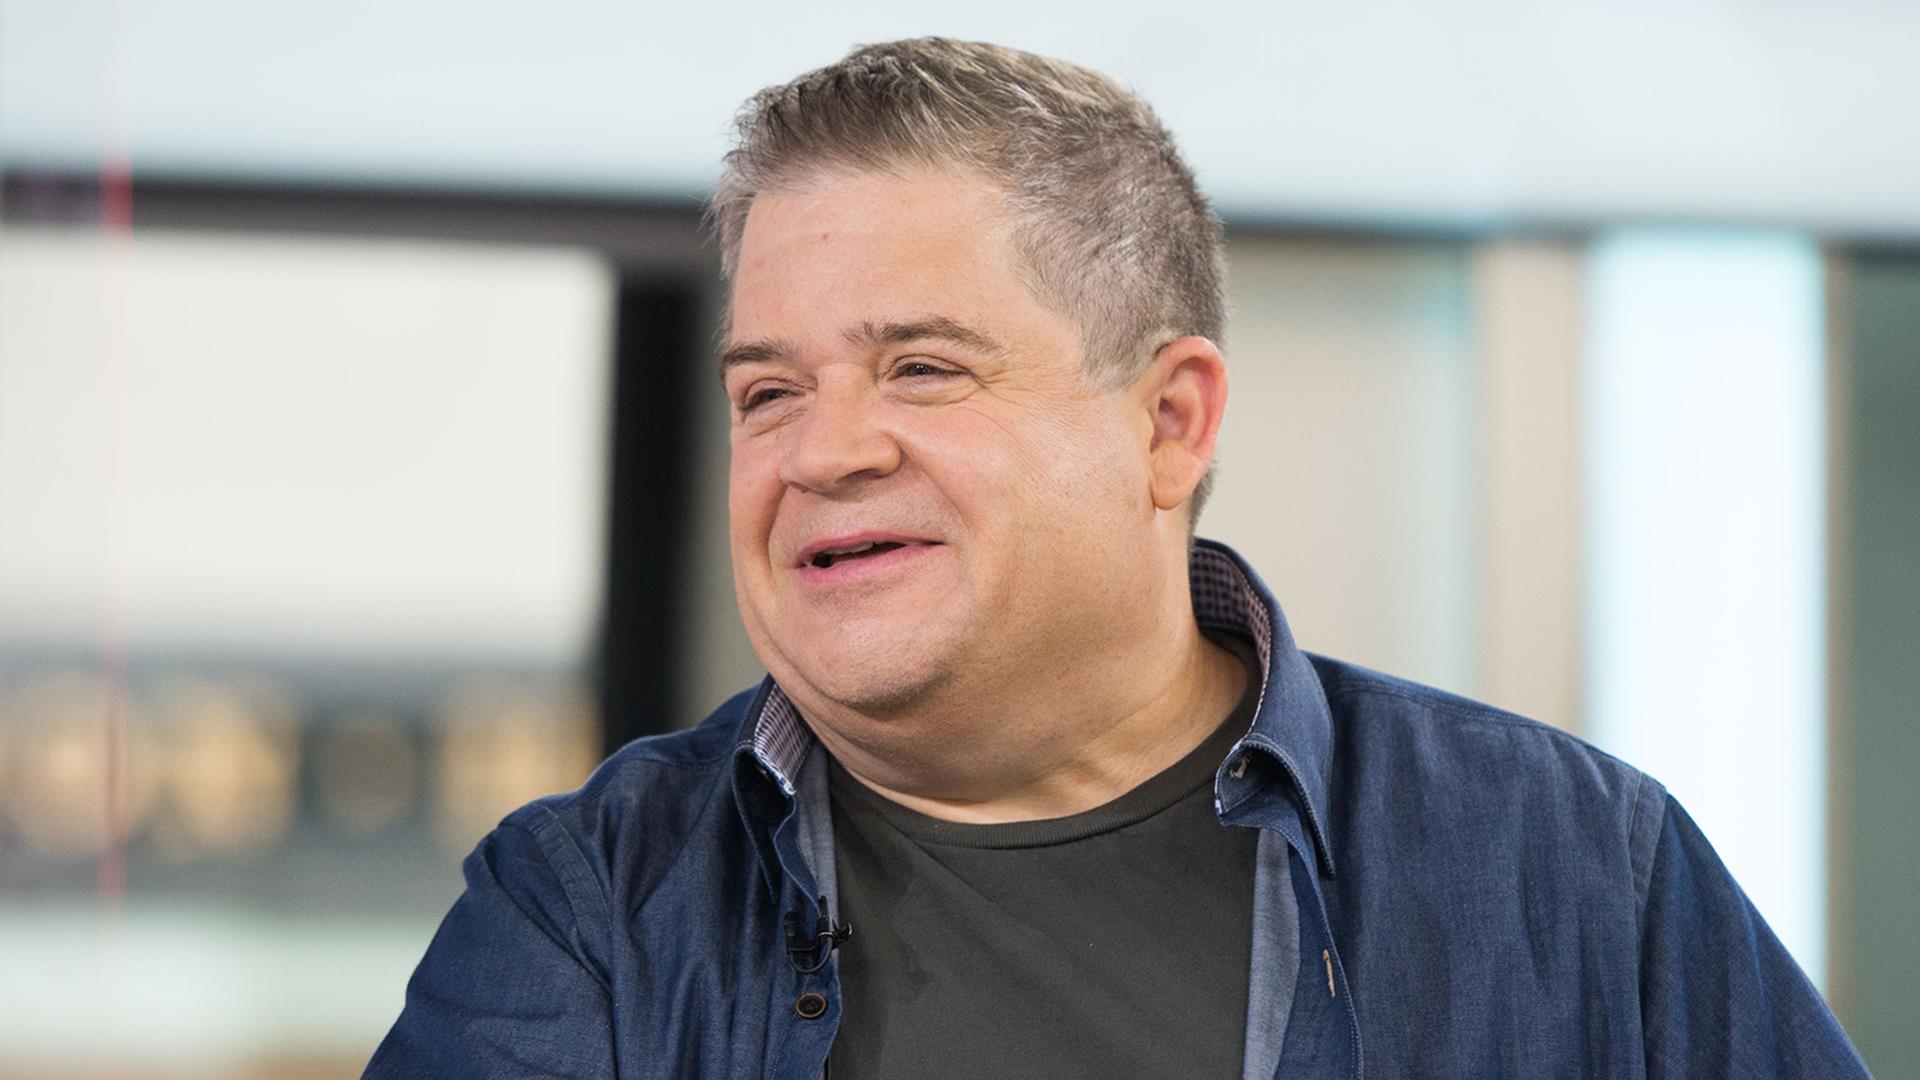 Patton Oswalt on new thriller ‘The Circle,’ Tom Hanks and ‘MST3K’ - TODAY.com